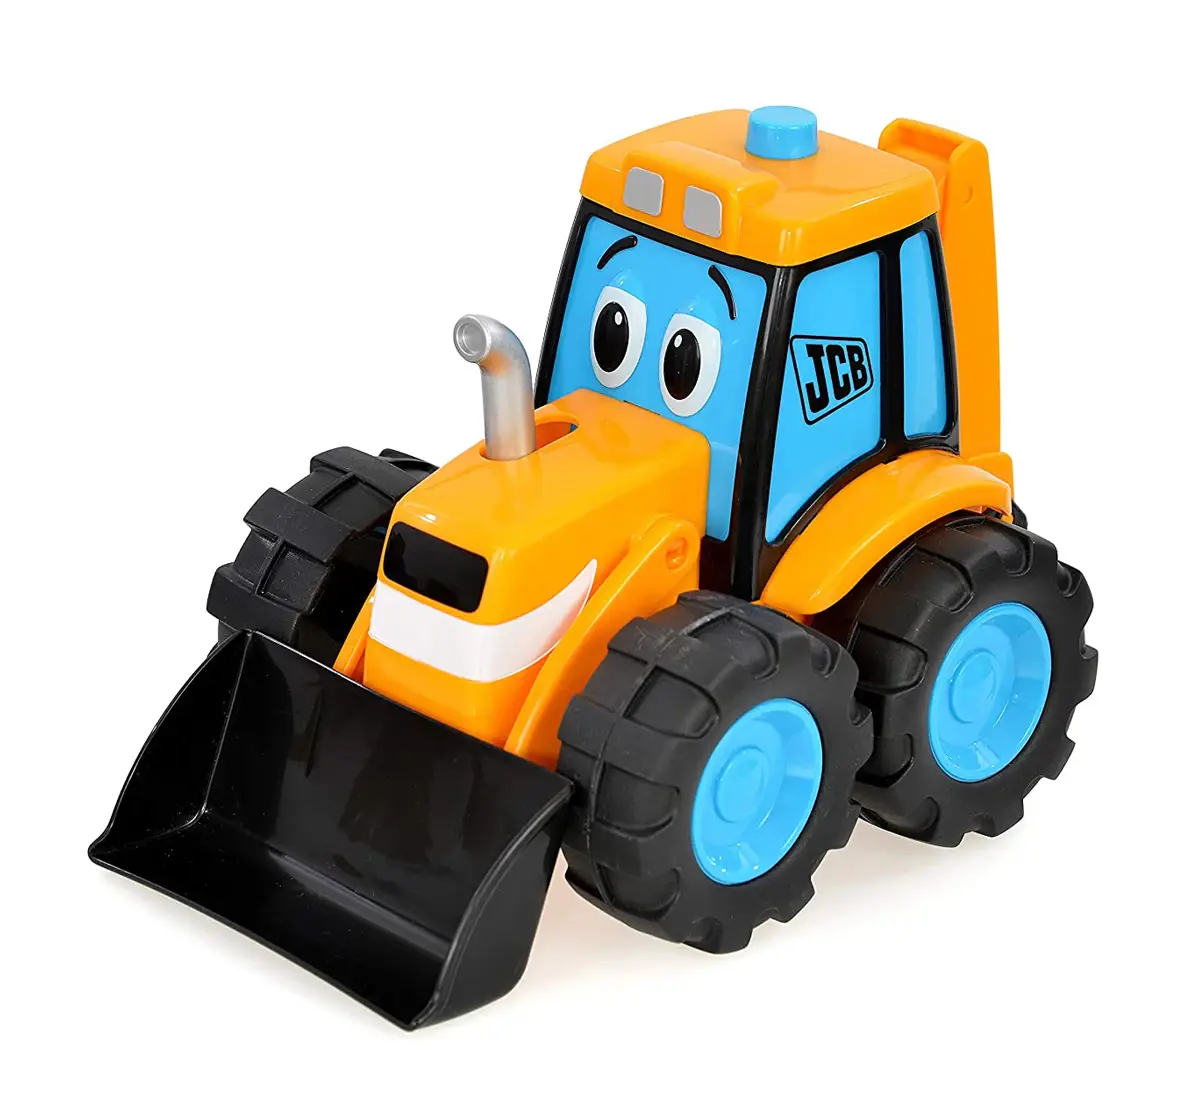 DEOXY Plastic 2 In 1 Jcb Construction Vehicle & Farm Tractor With Trolly  Vehicles Toys For Kids (Pack Of 2), Multi : Amazon.in: Toys & Games